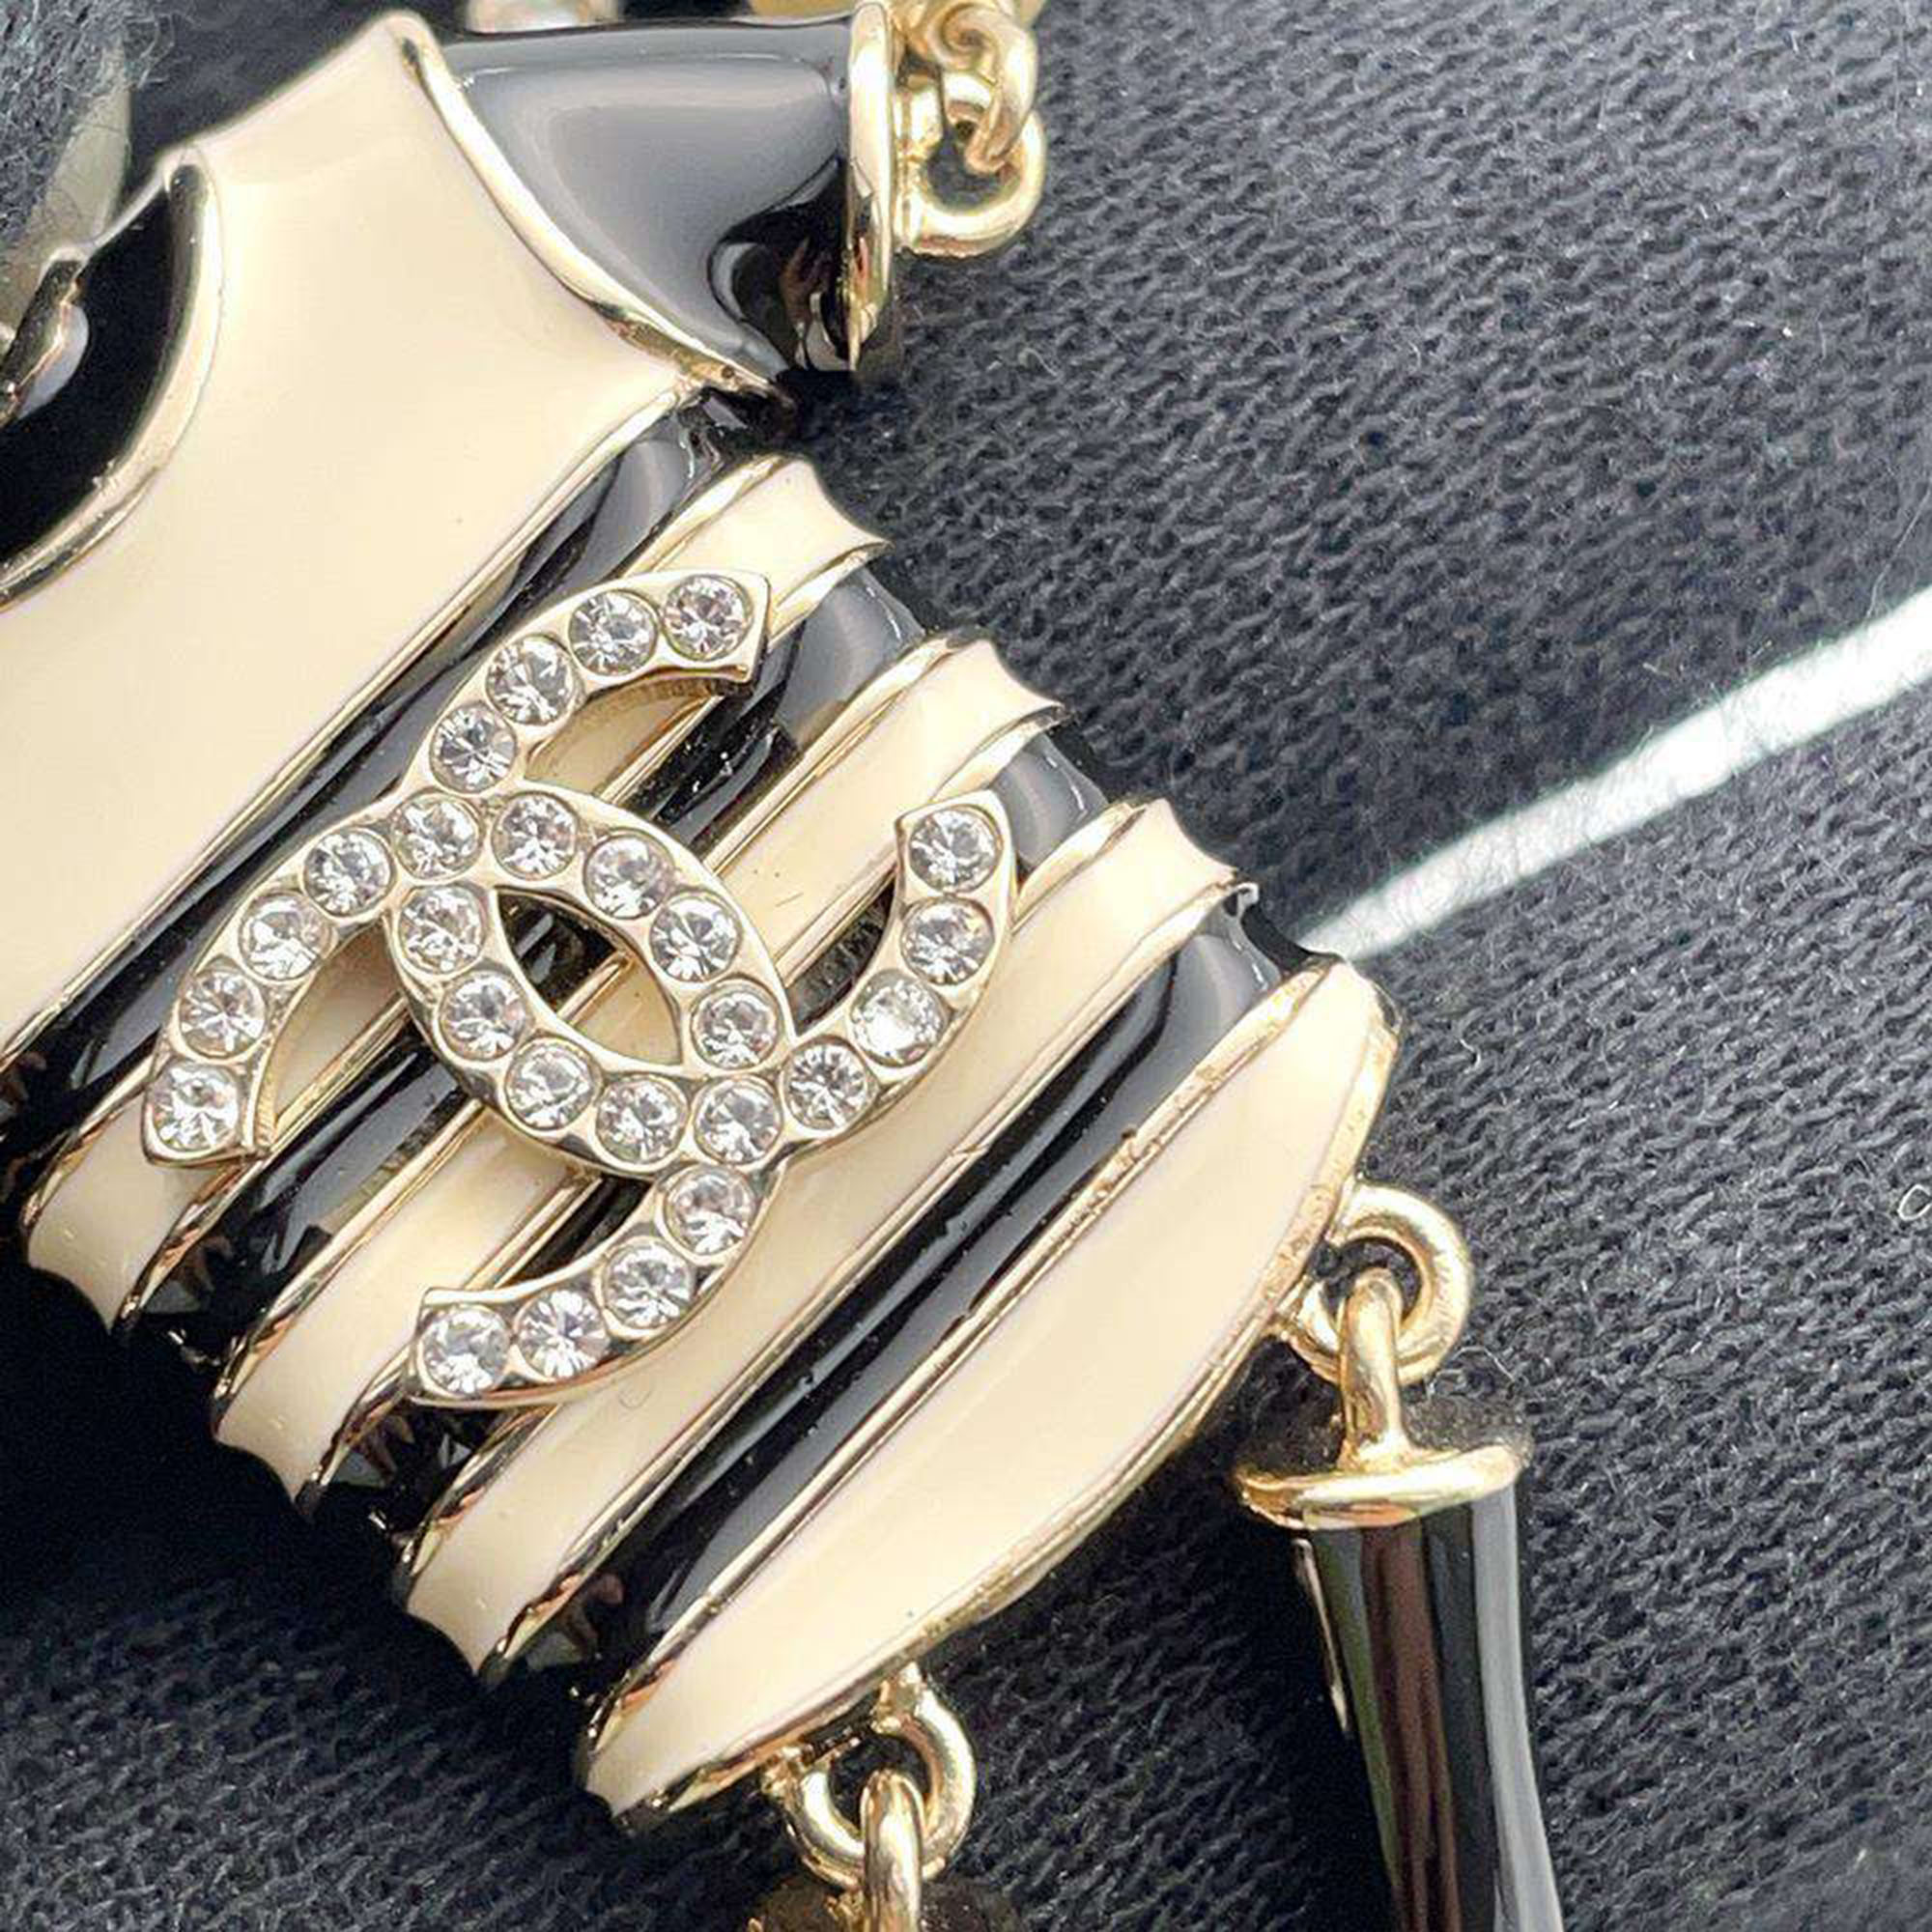 CHANEL DollBag Charm Necklace Gold/Black/White A58714 Faux Pearl  Rhinestone Metal